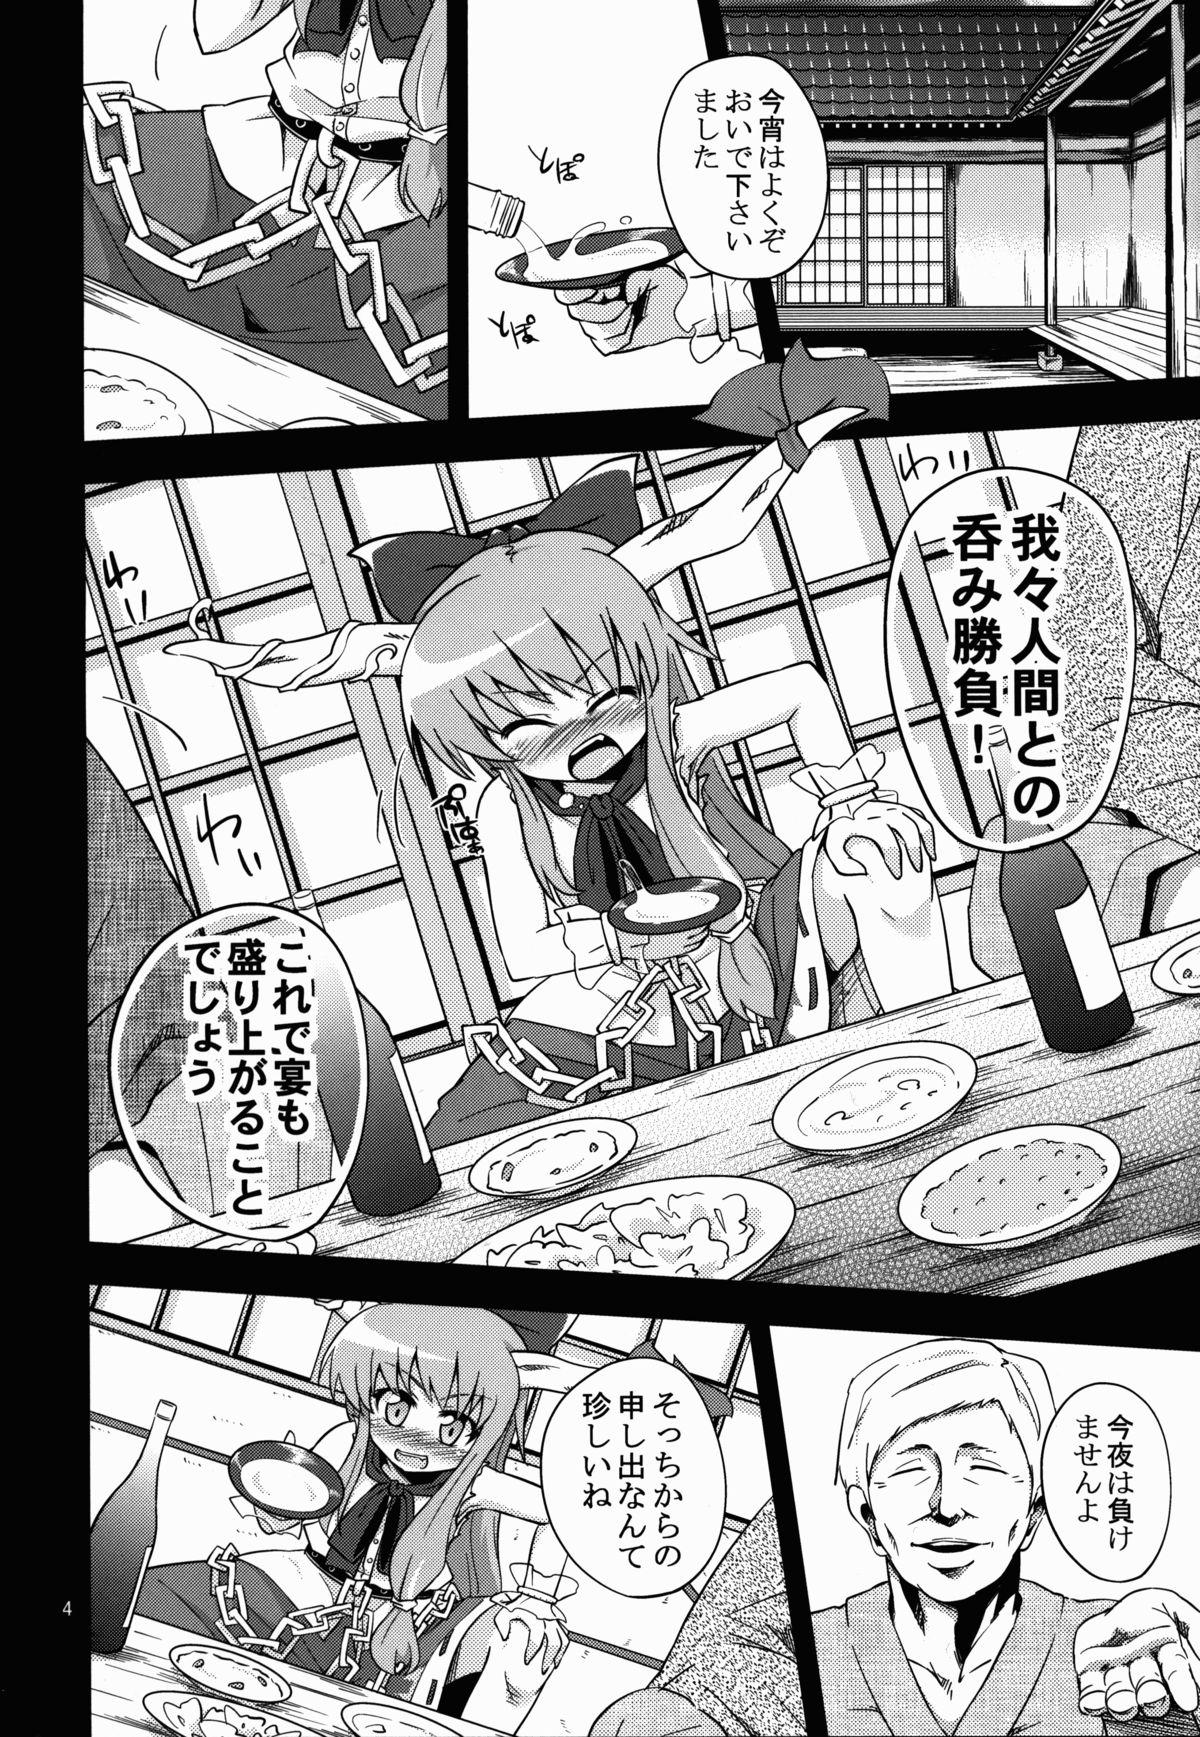 Couples 鬼犯嘘犯喜 - Touhou project Perfect Ass - Page 4